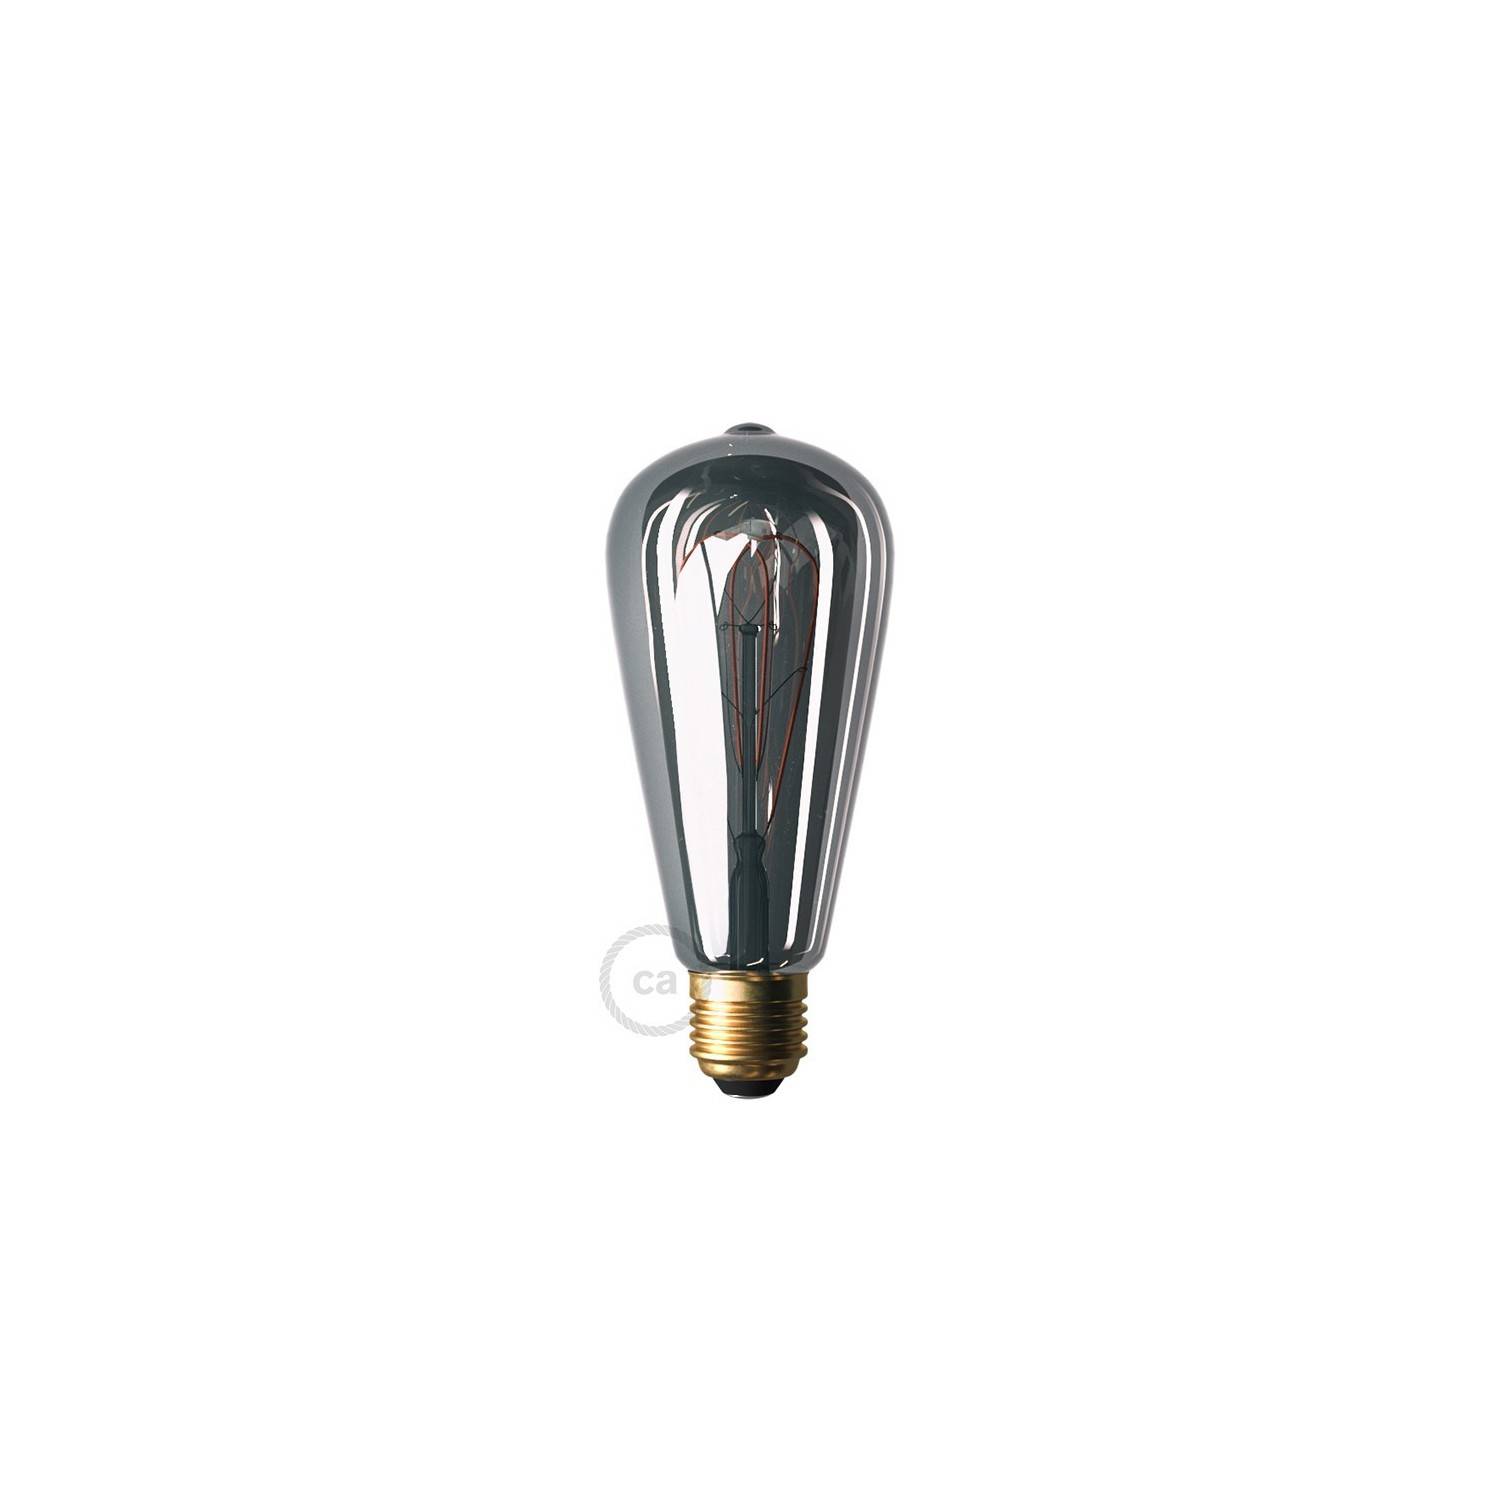 LED Smoky Light Bulb - Edison ST64 Curved Double Loop Filament - 5W 160Lm E27 1800K Dimmable